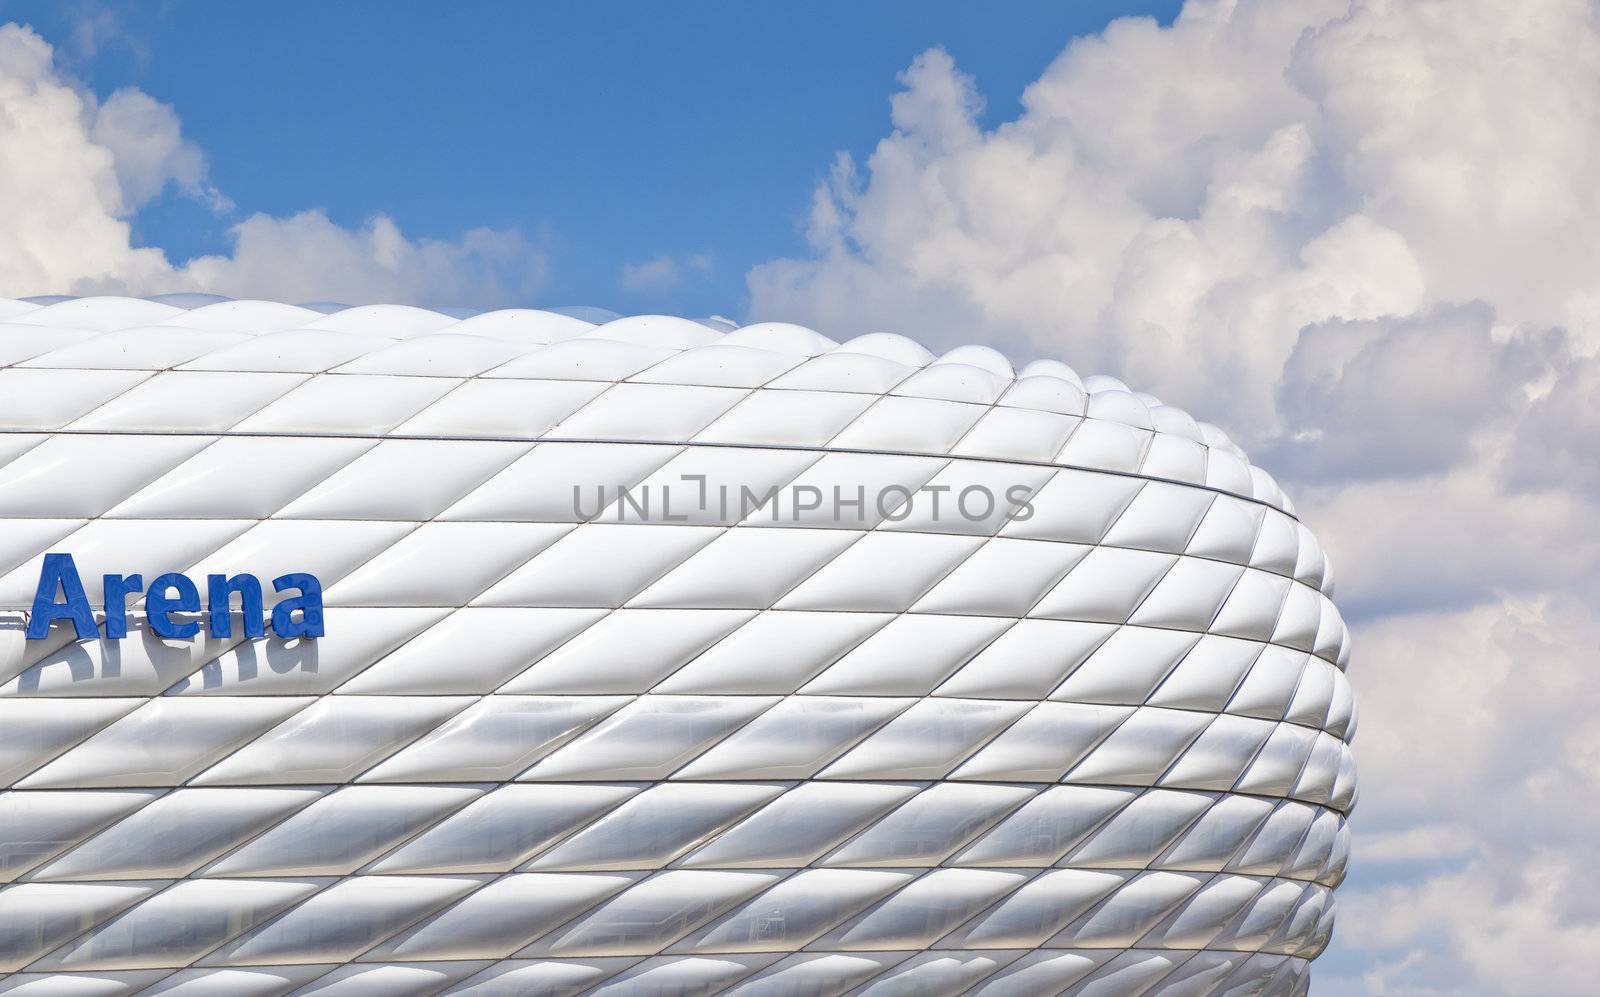 An image of the munich soccer arena